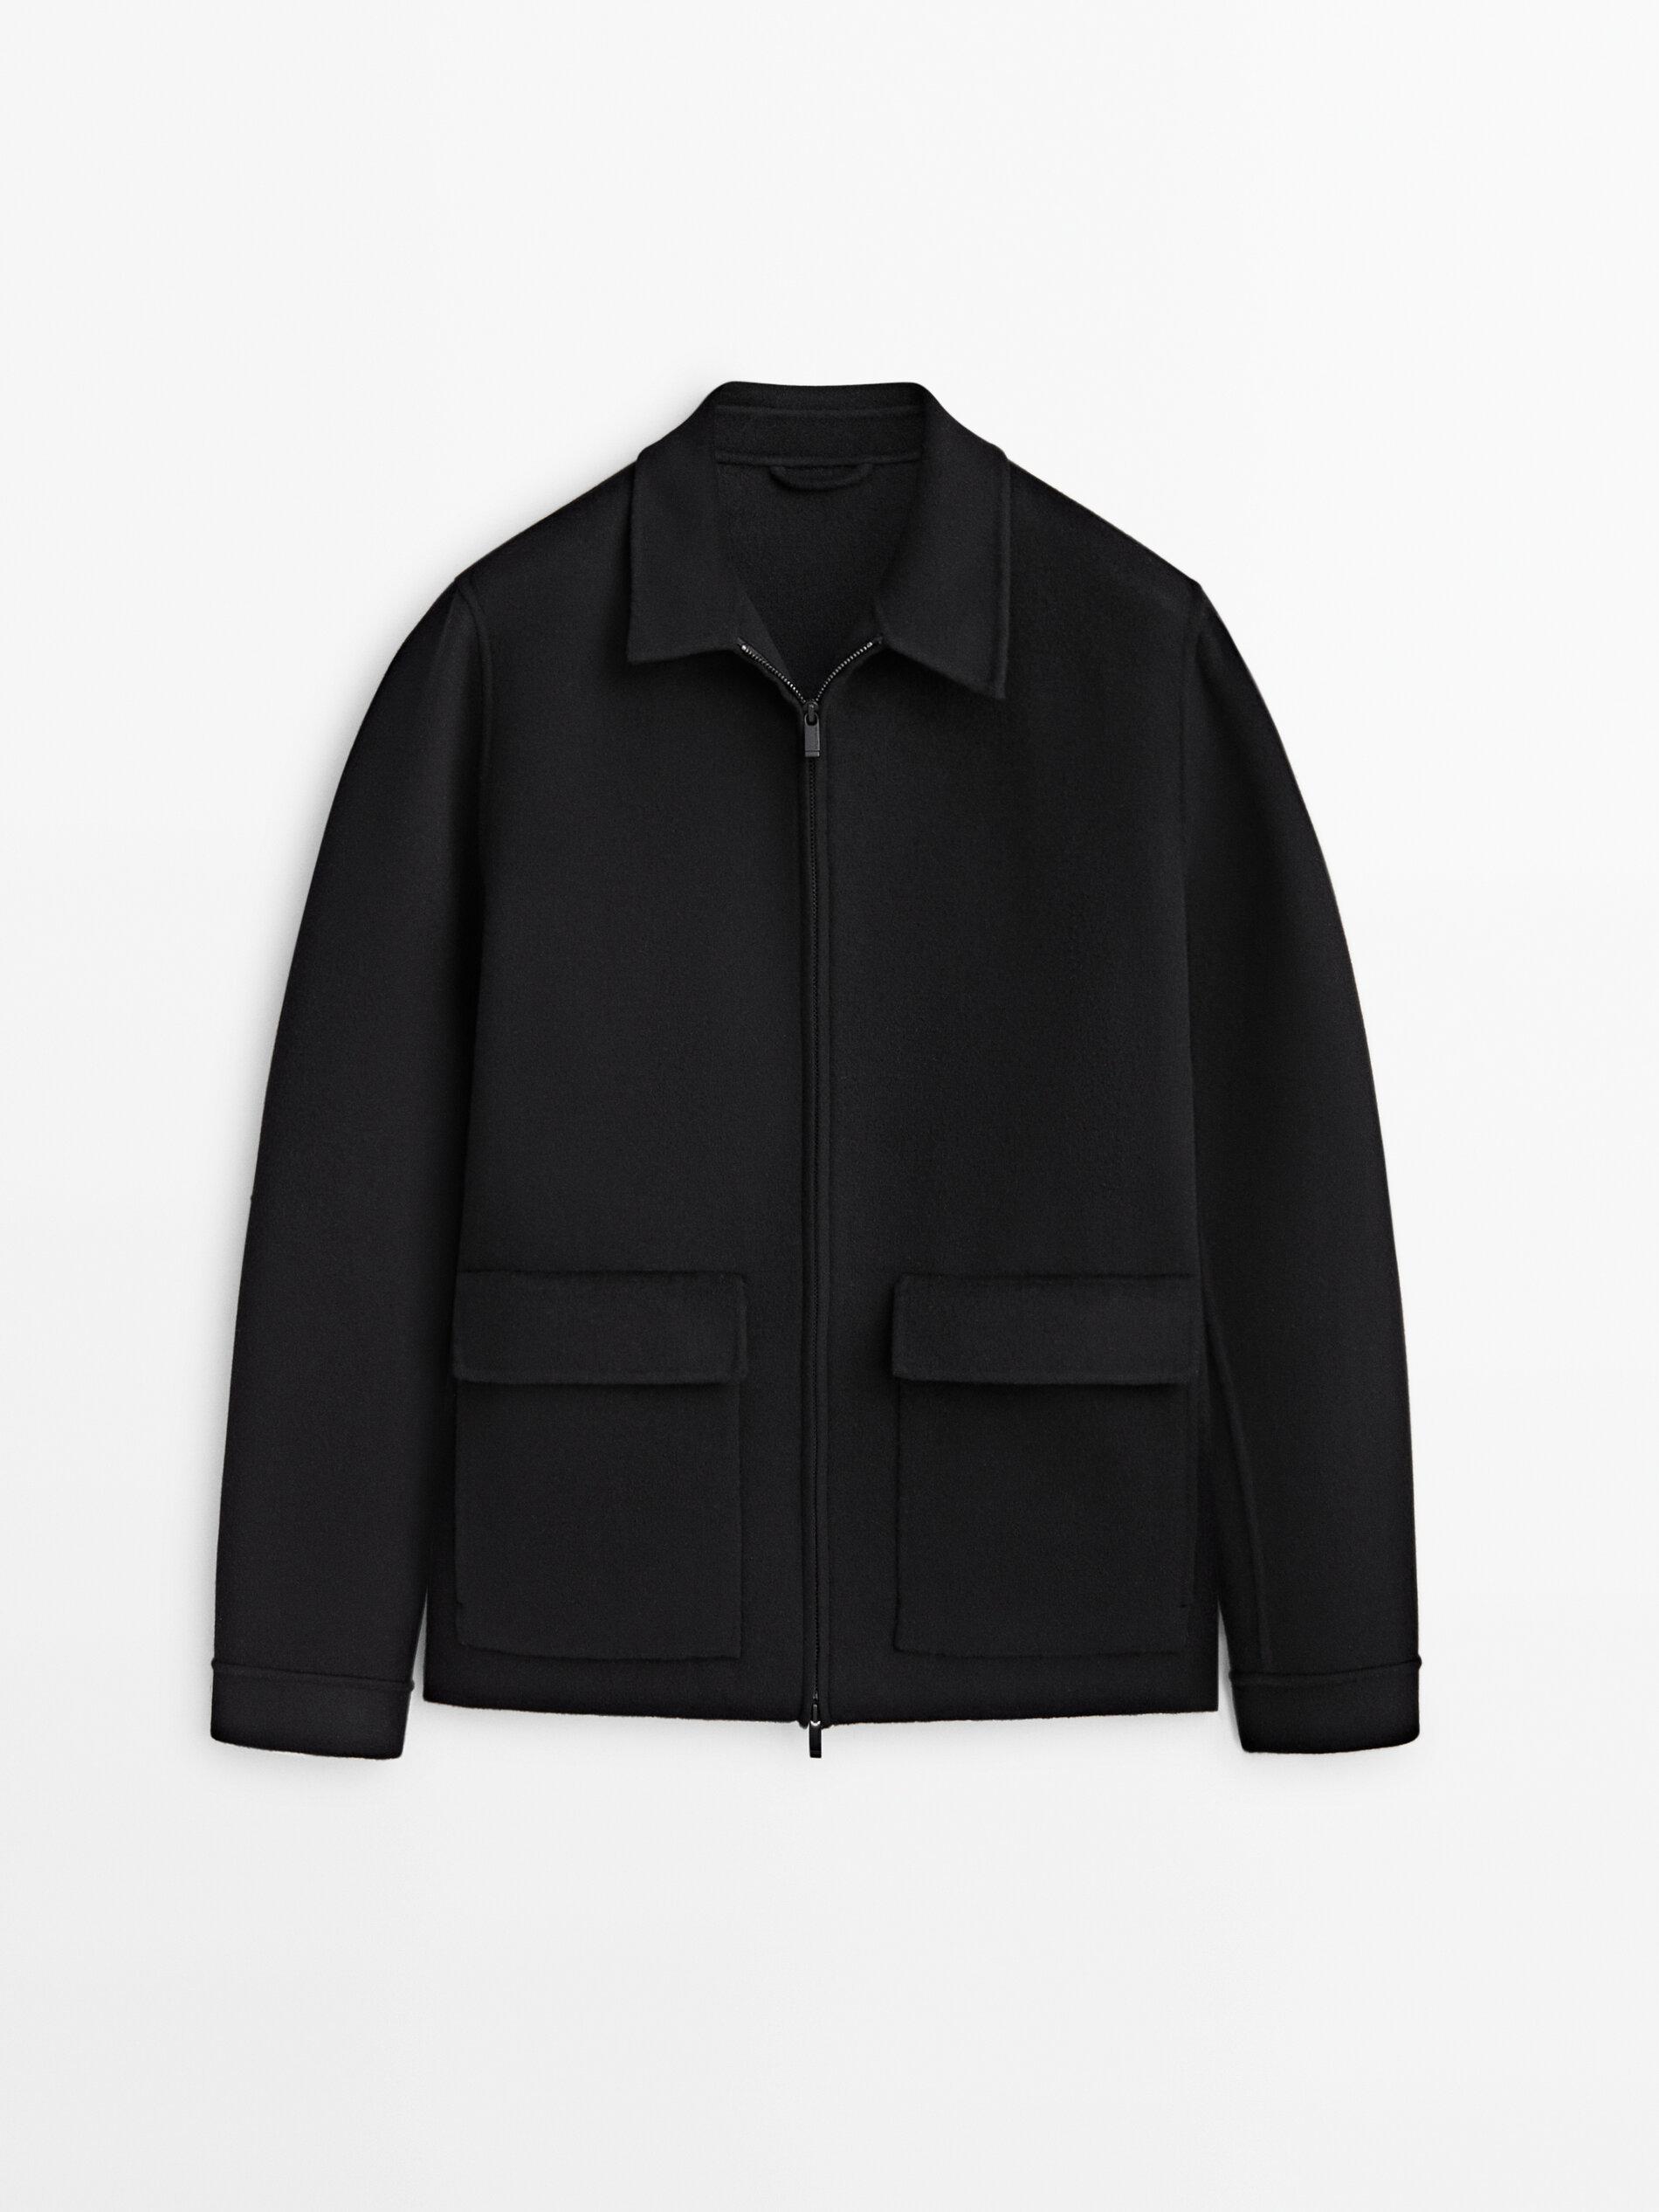 MASSIMO DUTTI Wool Jacket With Zip - Limited Edition in Black for Men | Lyst